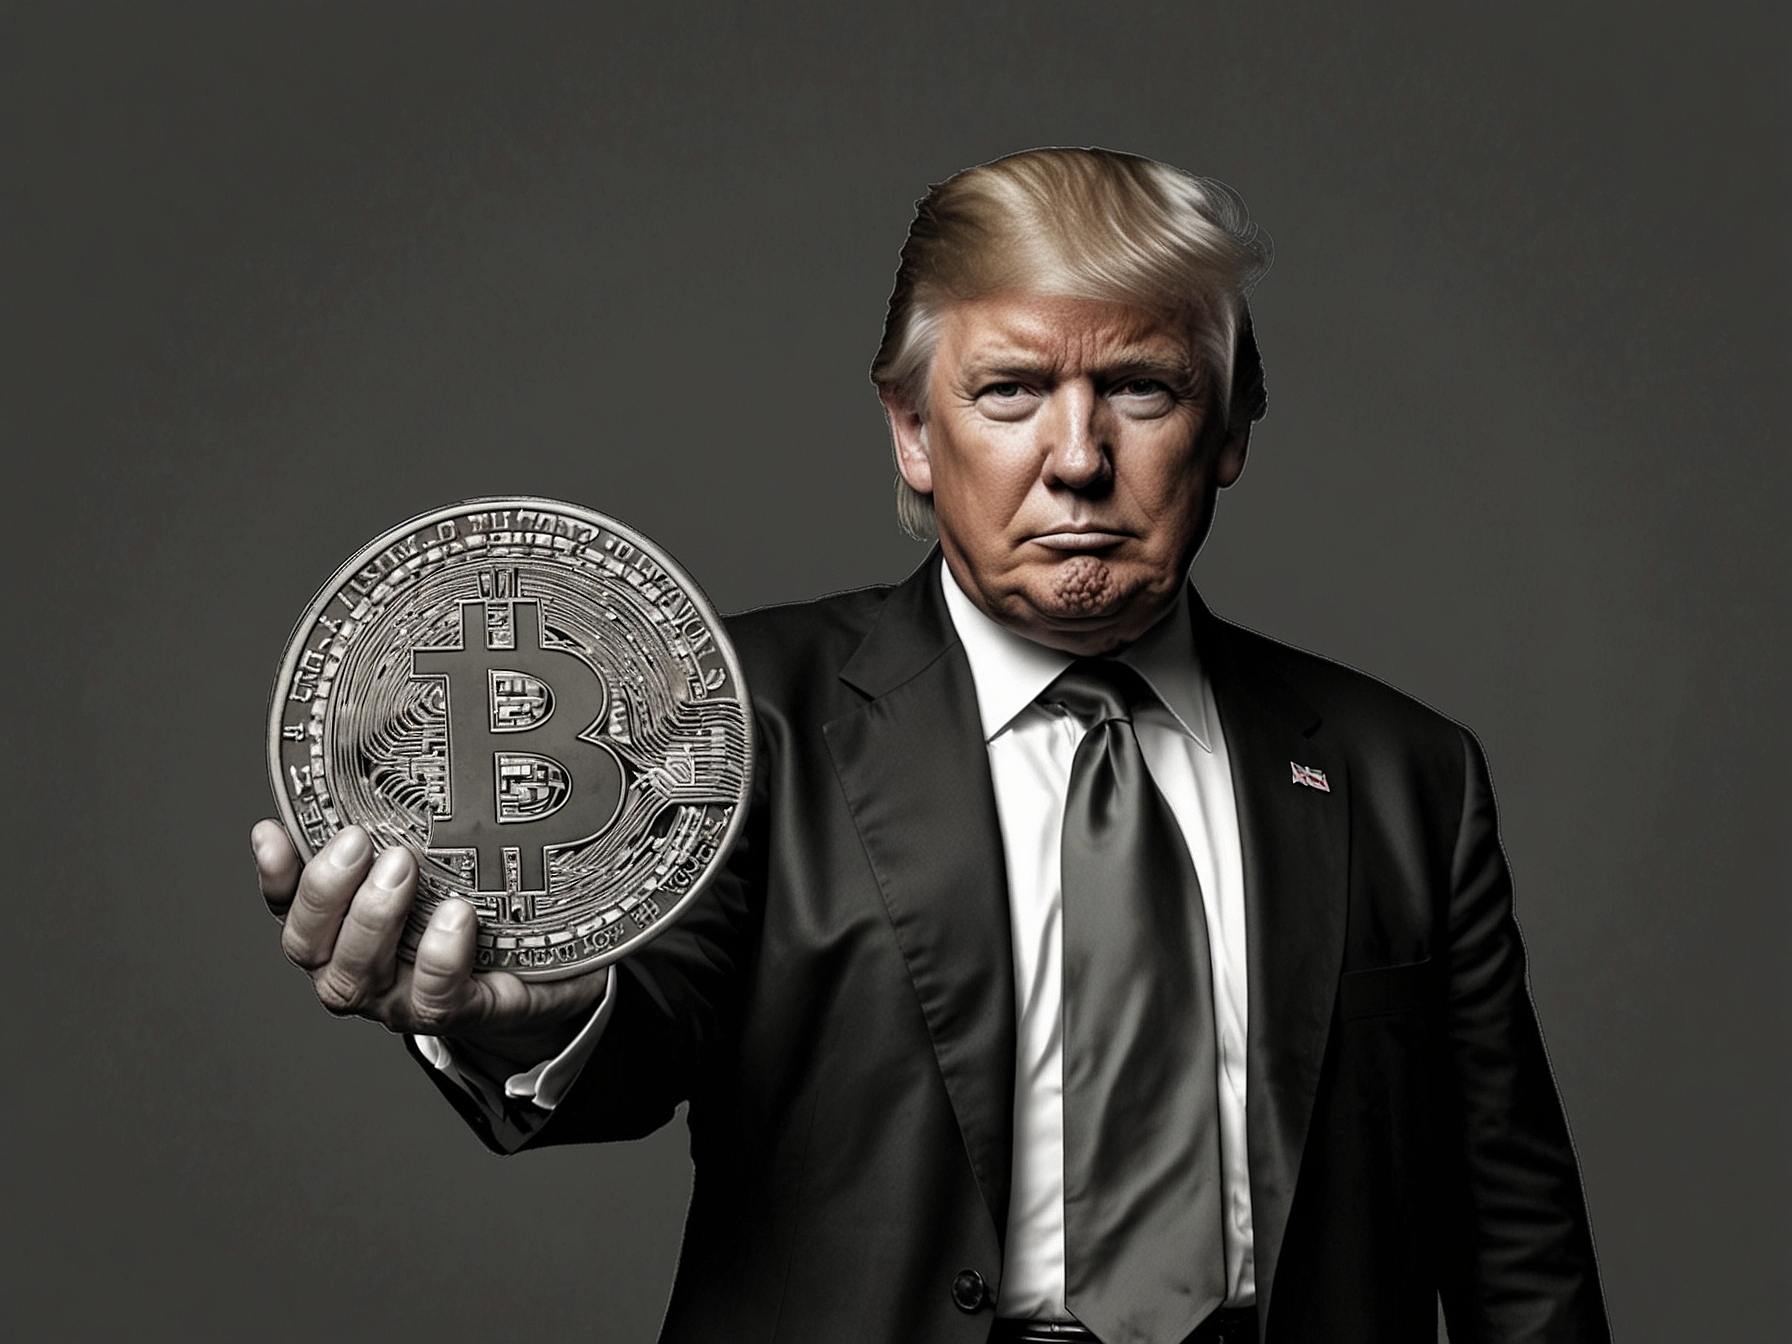 Donald Trump holding a Bitcoin symbol, representing his shift from criticizing to accepting Bitcoin donations for his reelection campaign.